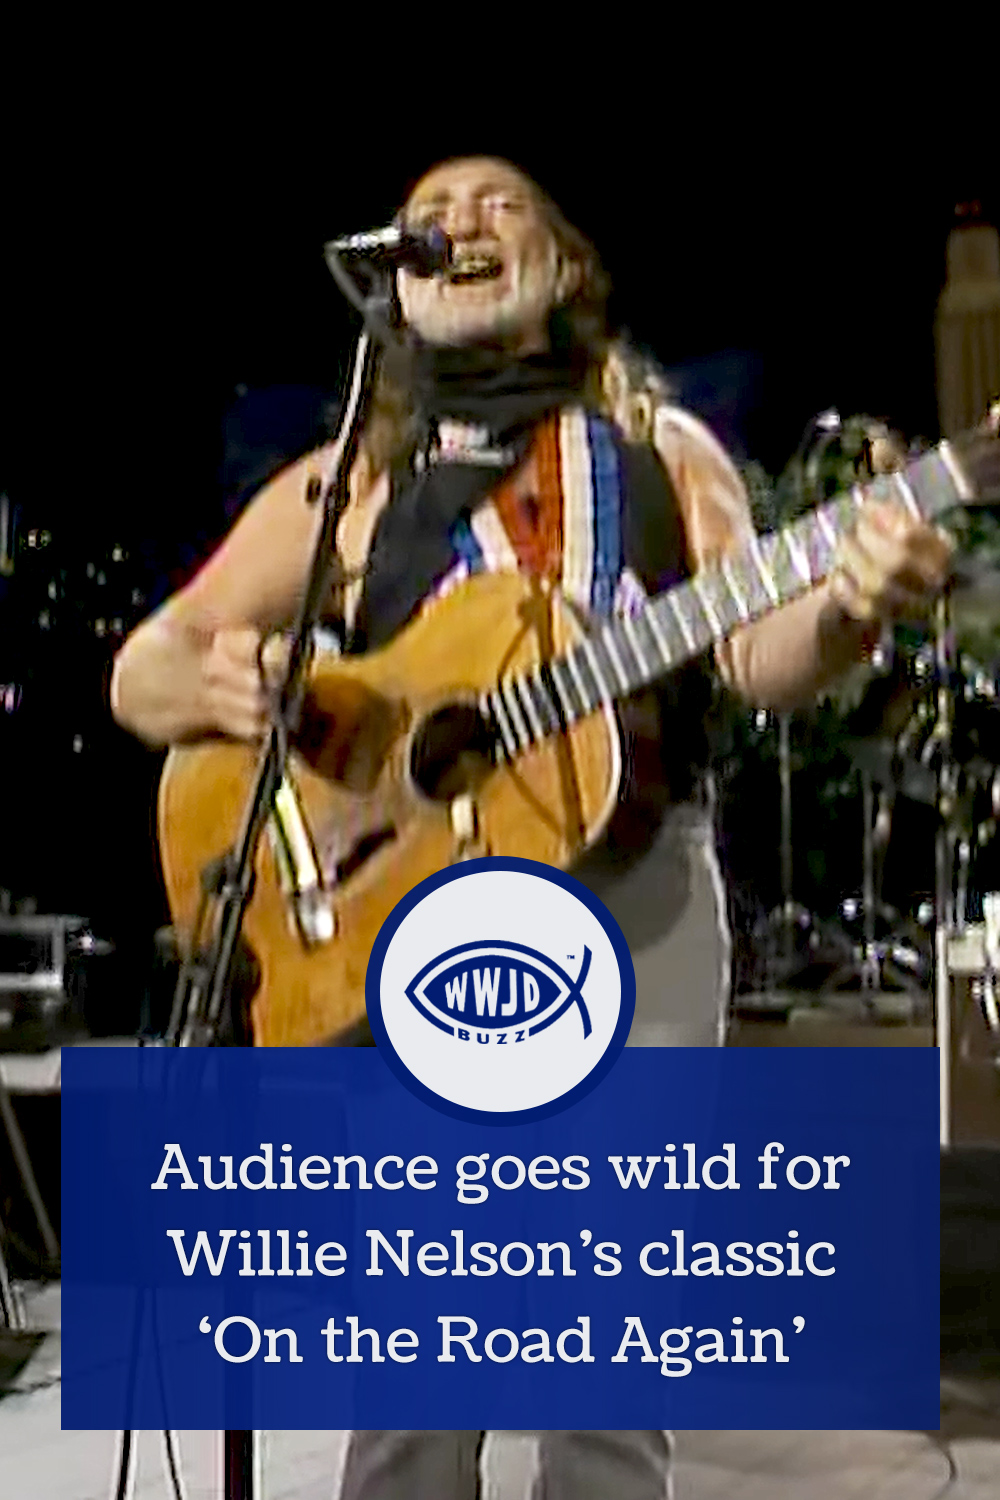 Audience goes wild for Willie Nelson’s classic ‘On the Road Again’